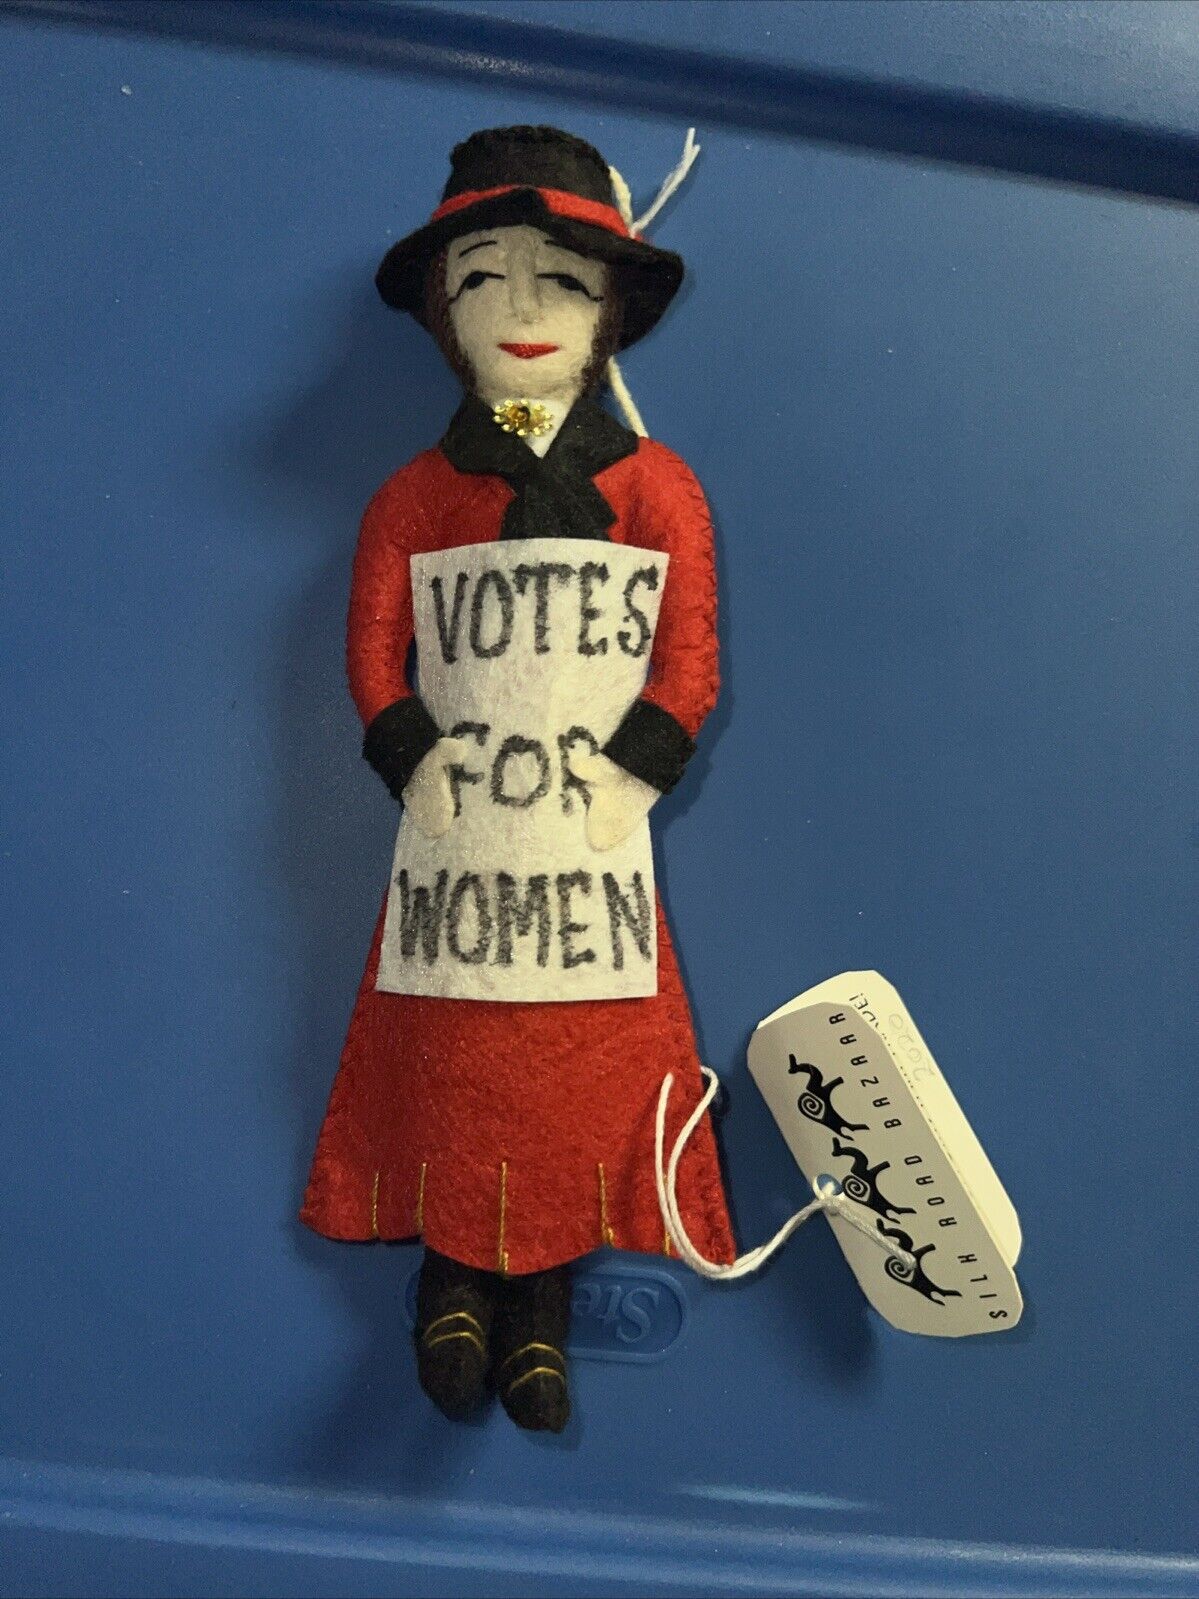 Suffragette Vote for Women  Red Votes for Women  Collectible Hand Sewn Felt